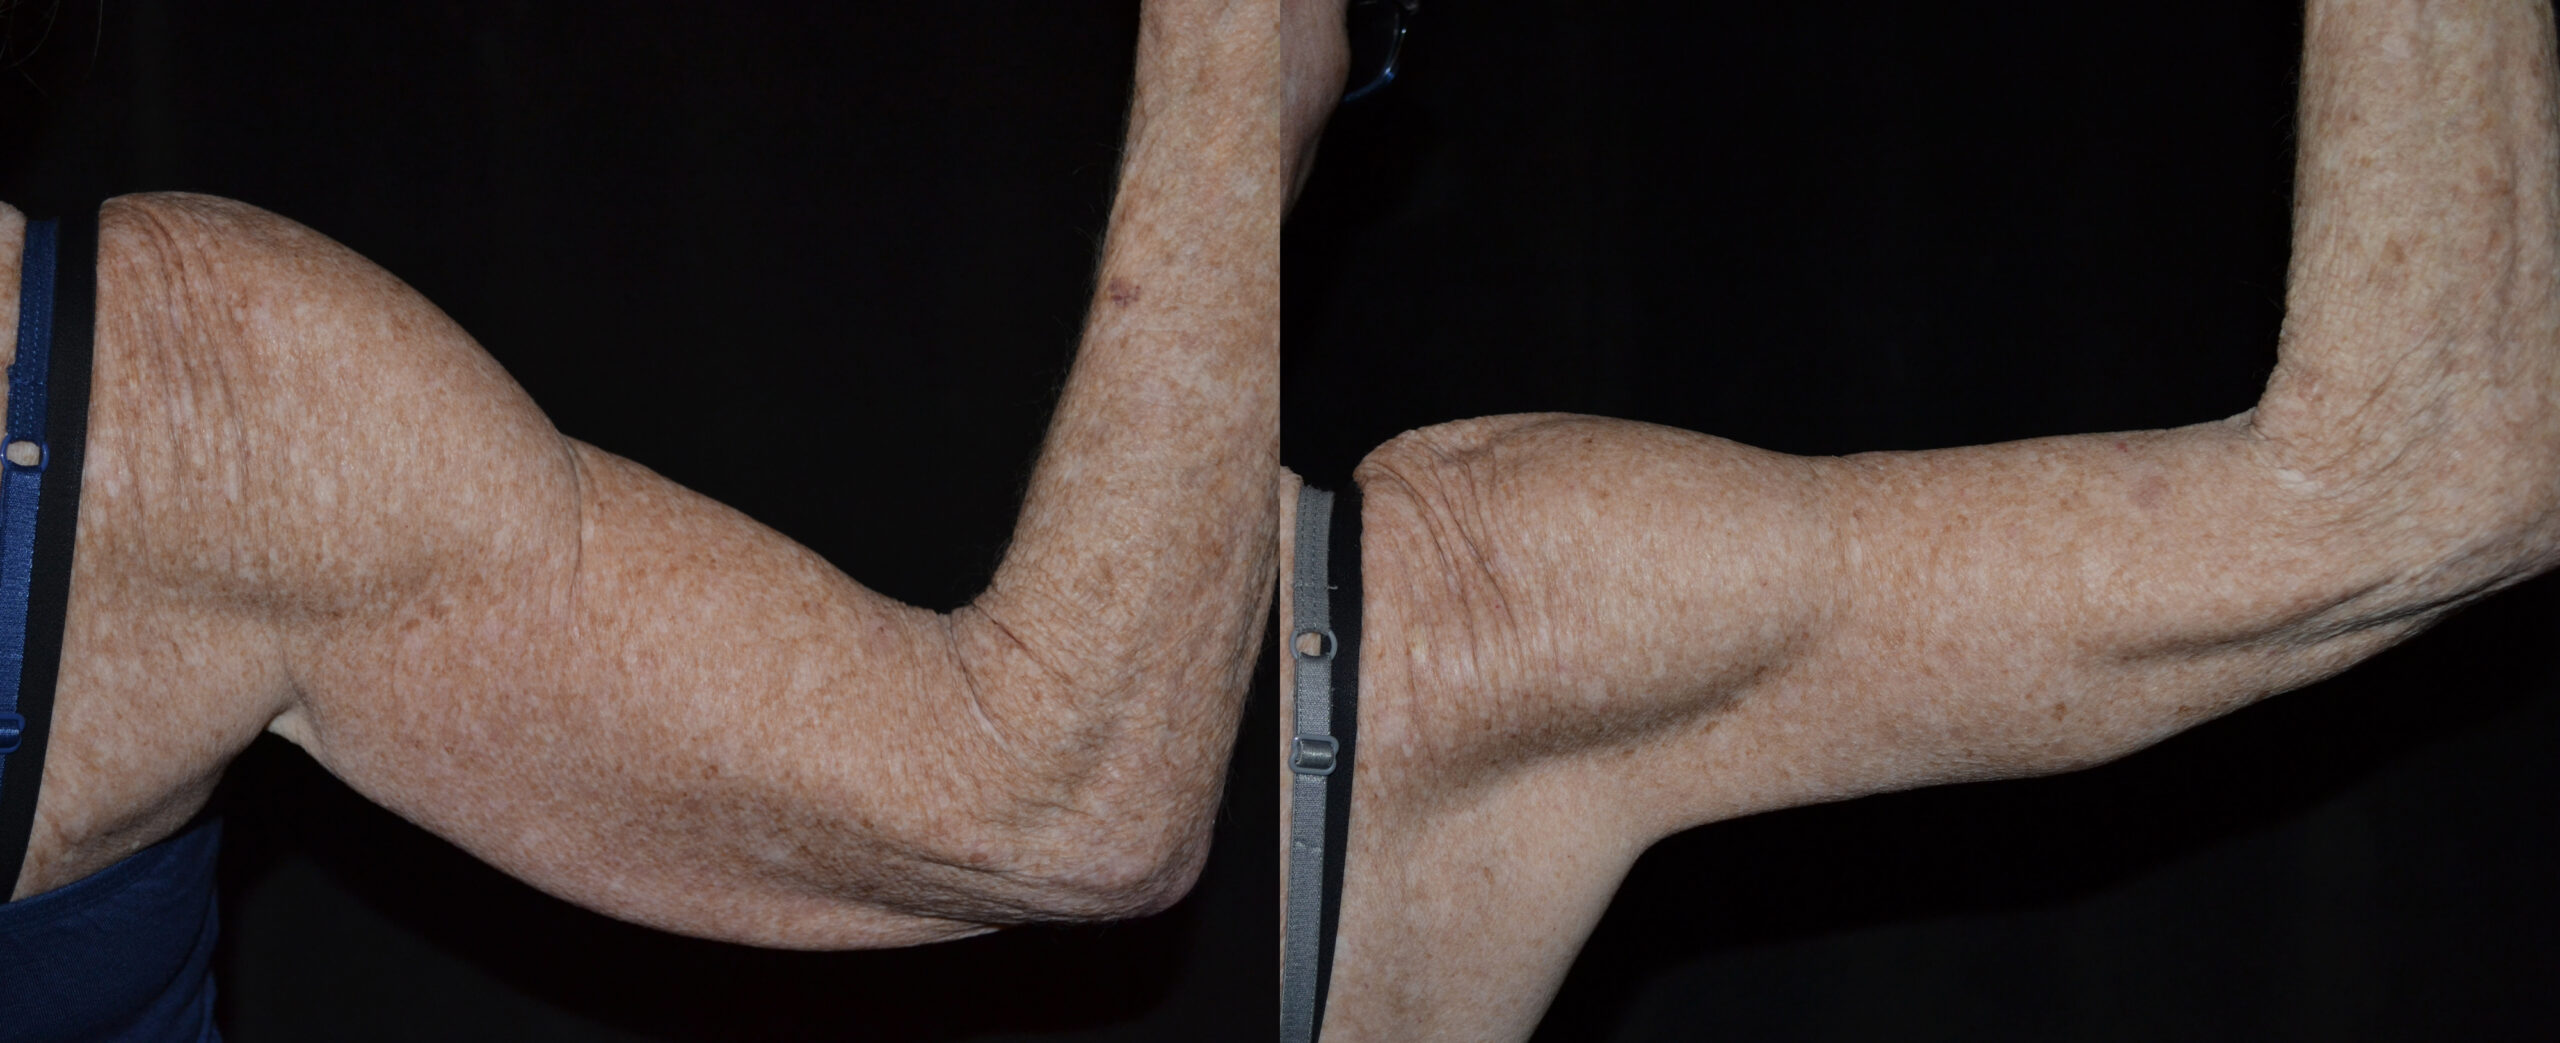 Brachioplasty (Upper Arm Reduction) before and after photo by Dr. William A. Stefani in Troy, MI